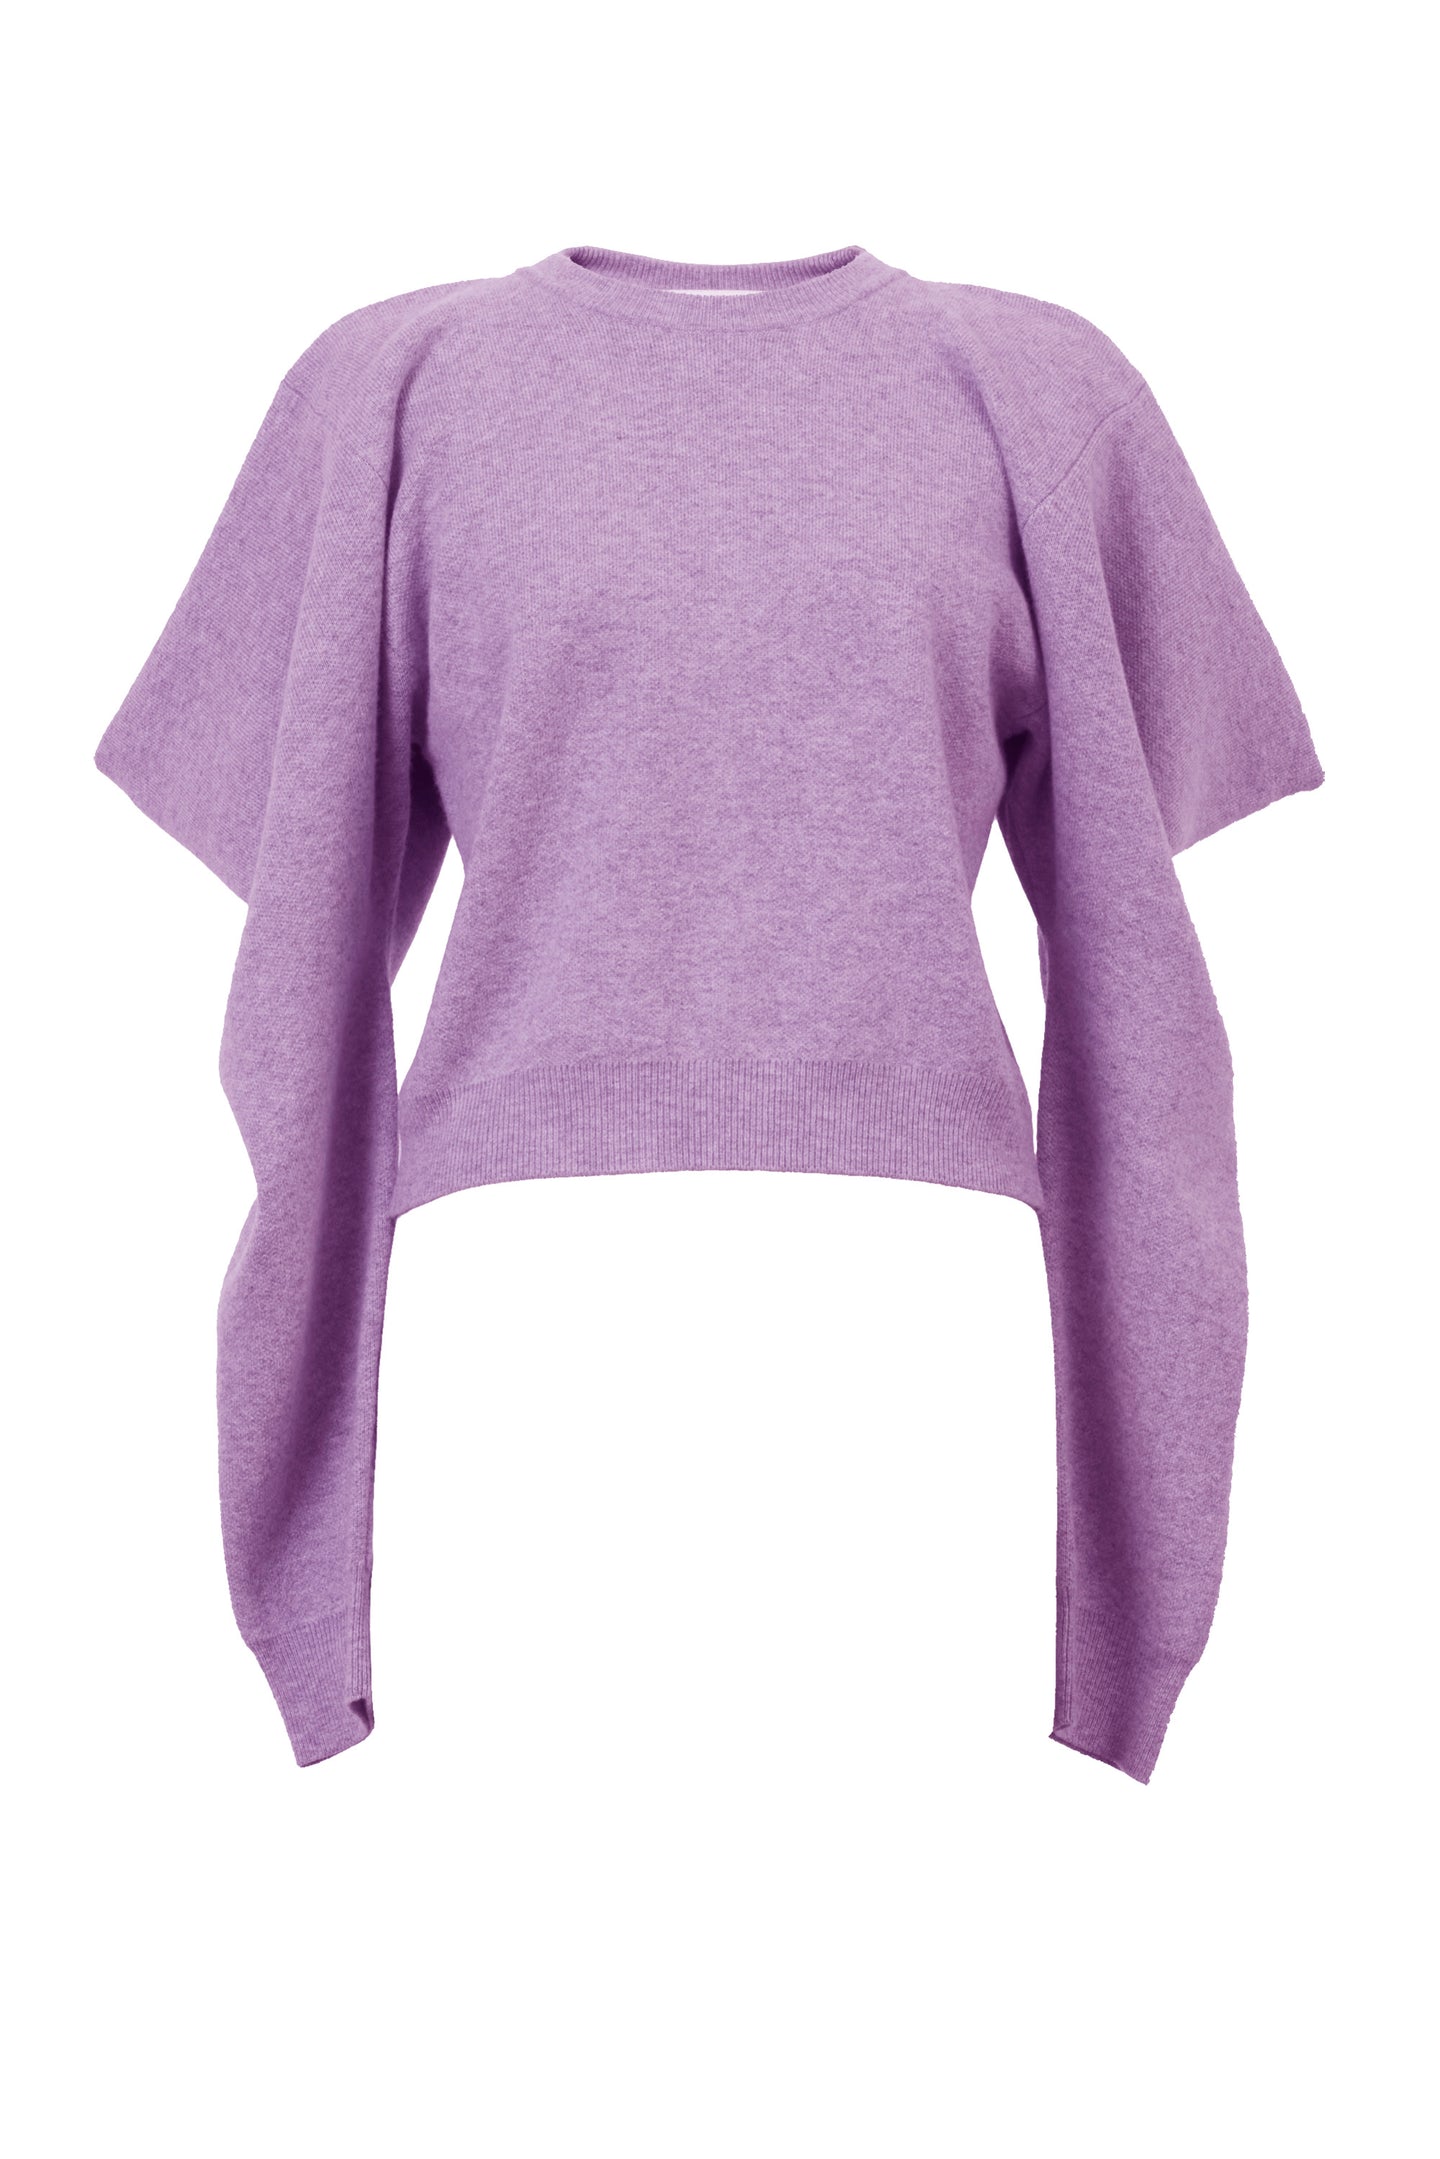 Wool Cashmere Knit Open Shoulder Top | Lilac